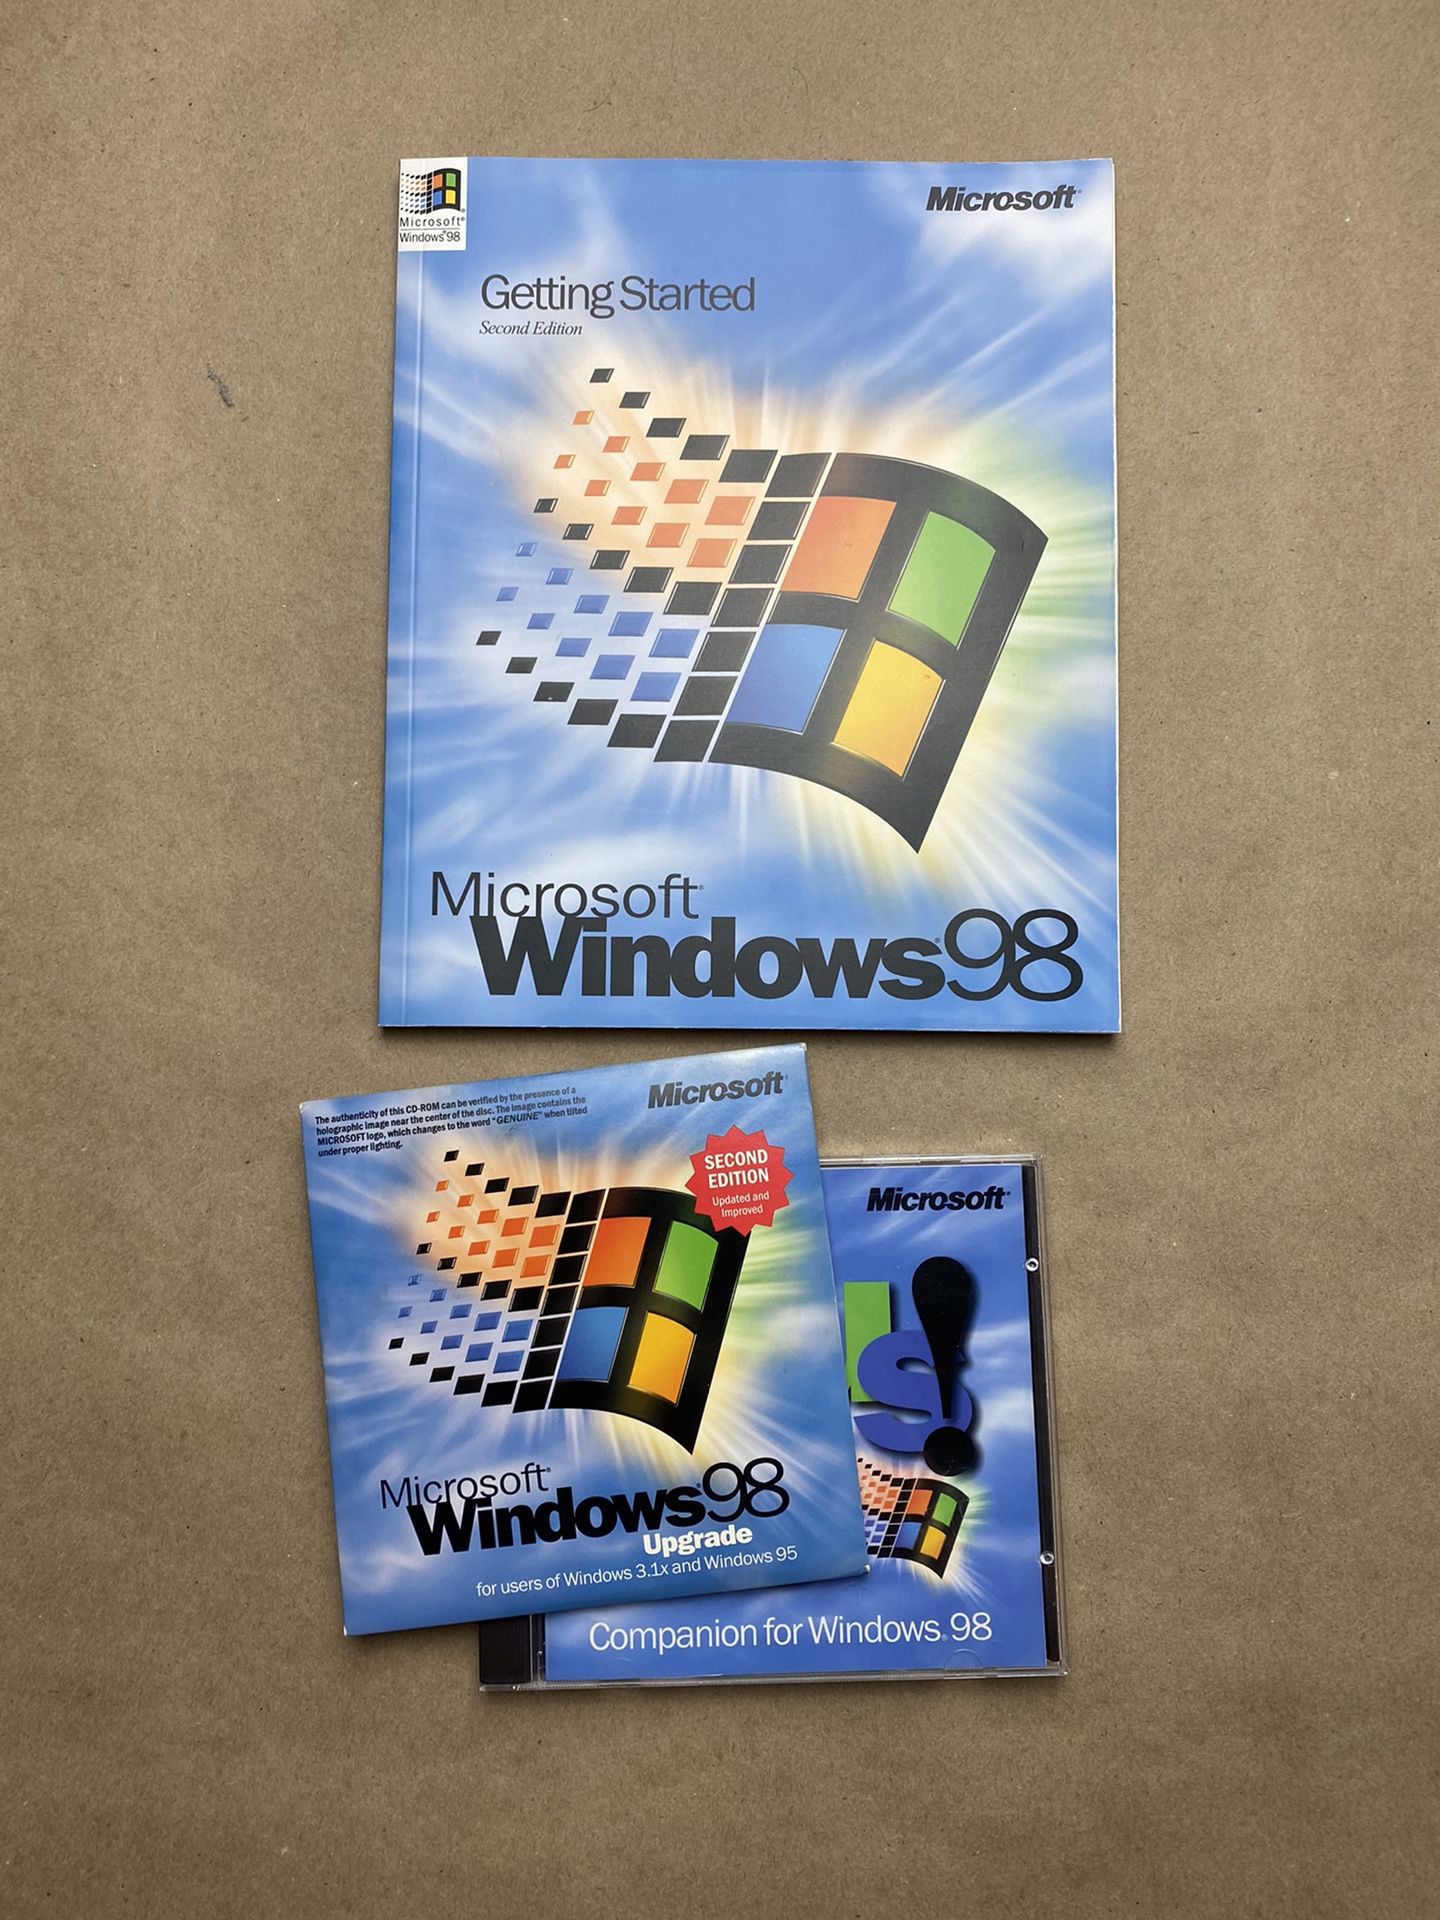 Outdated Windows Software - Make Me An Offer